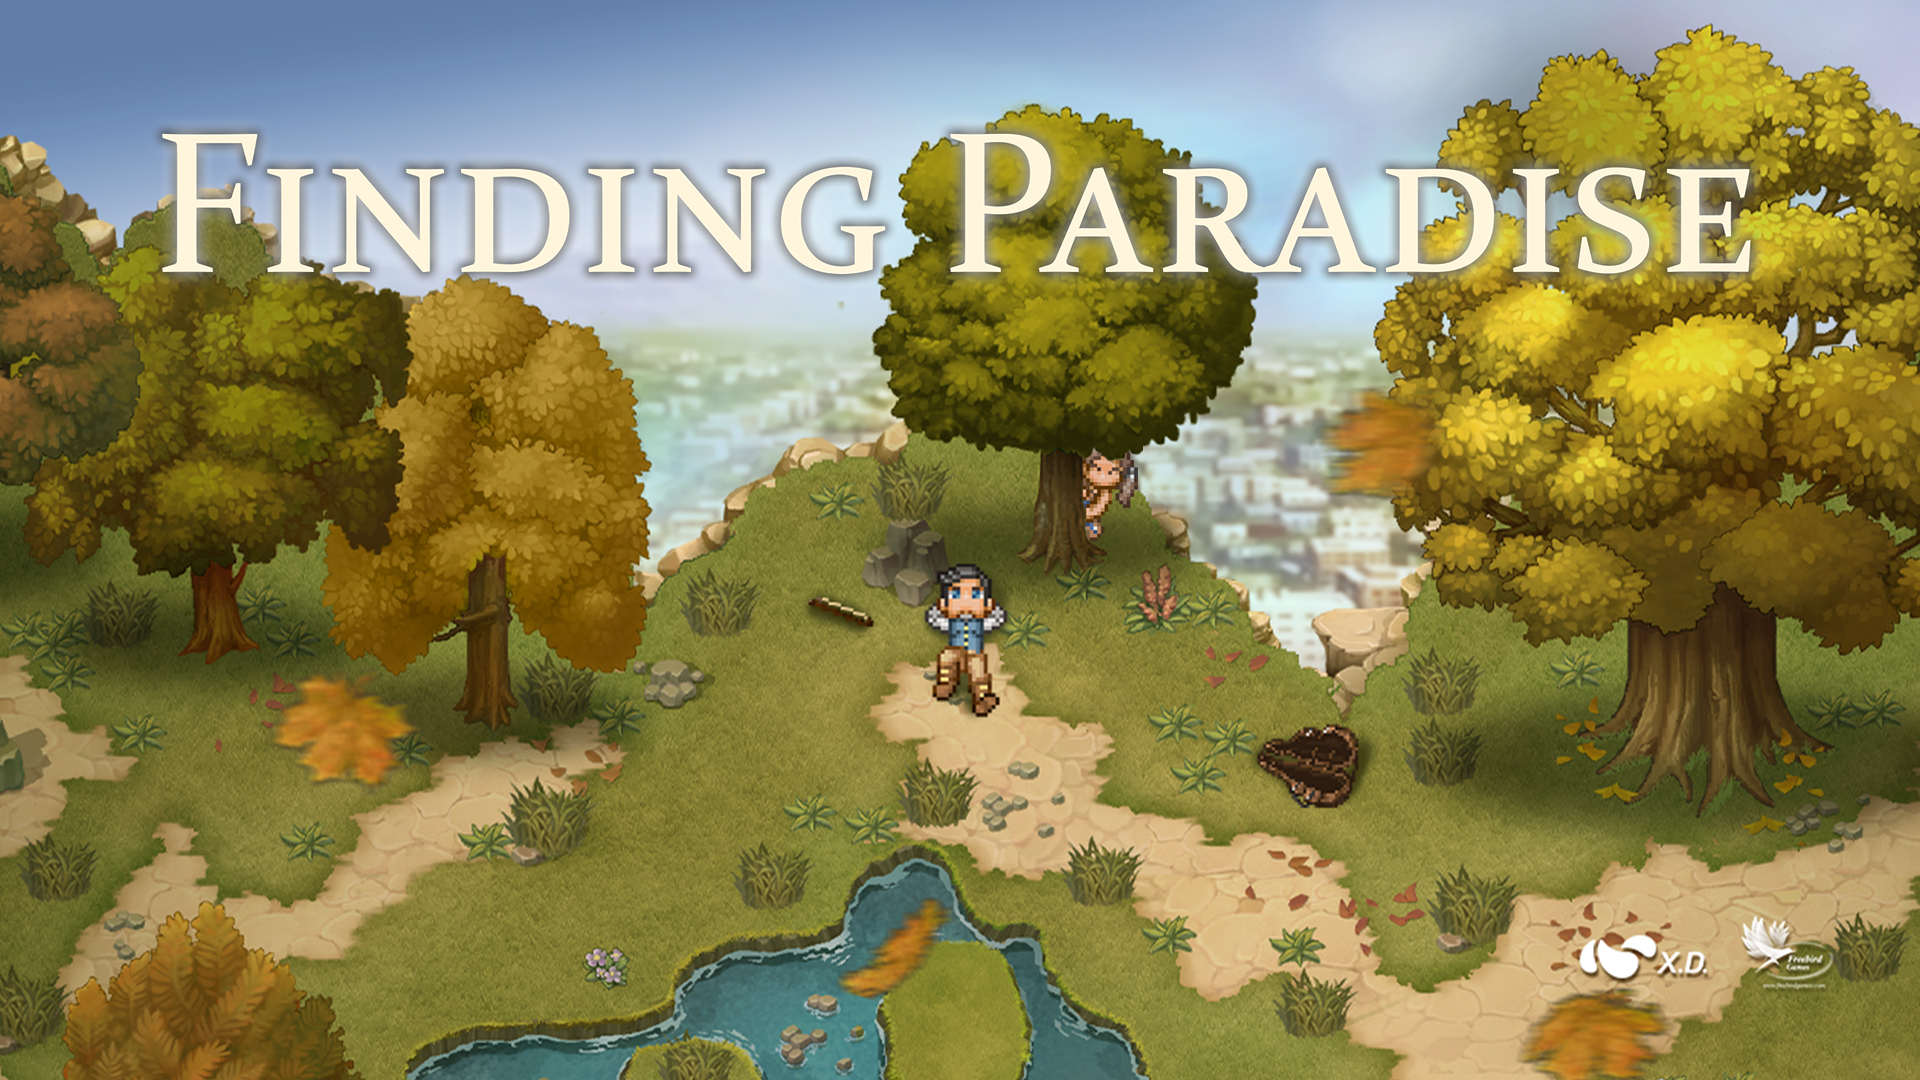 For the second part of Moon, Finding Paradise is finally coming to mobile, you can pre-register now